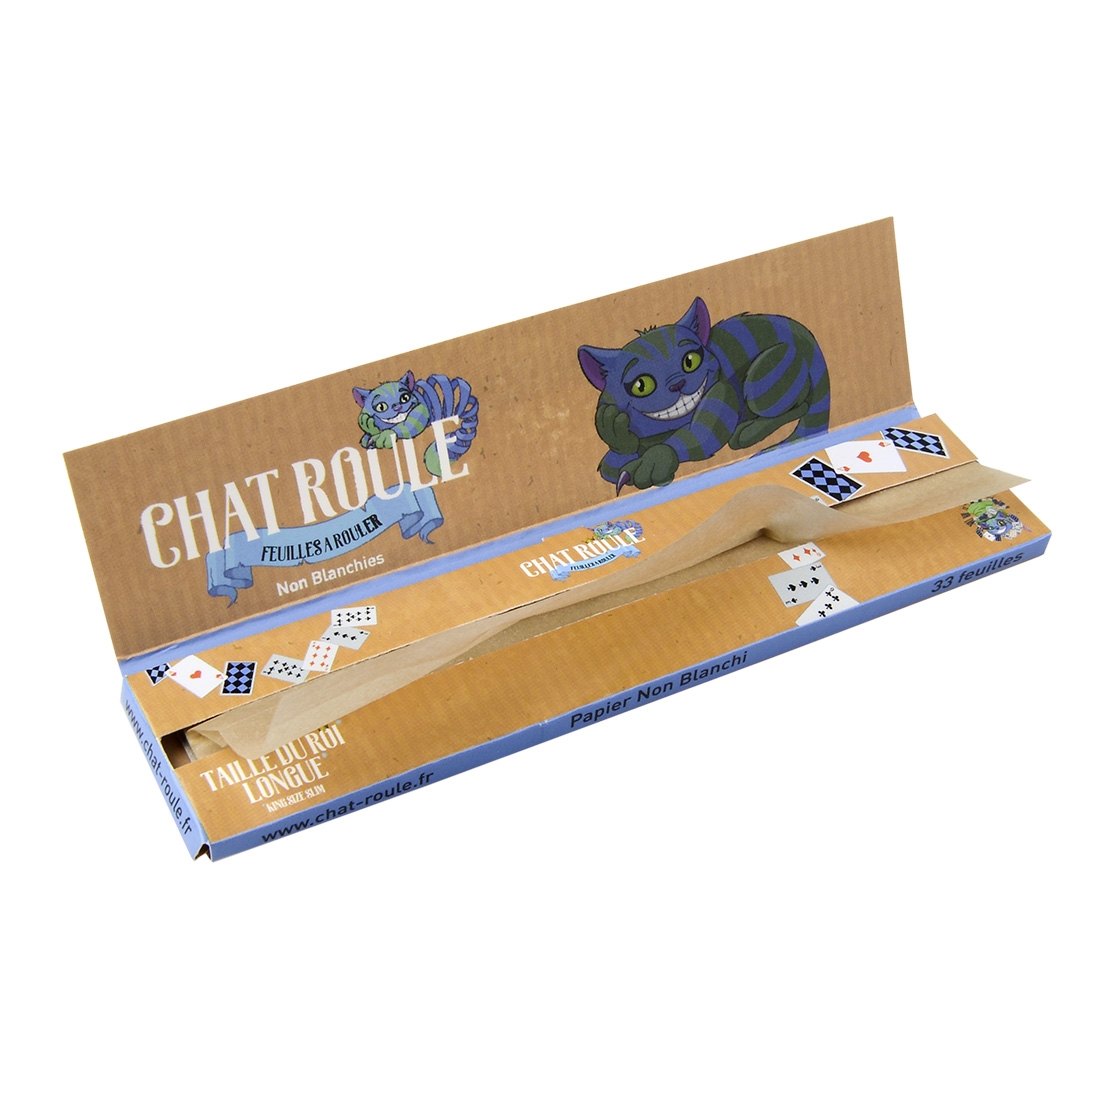 chat roule king size slim non blanchies x50